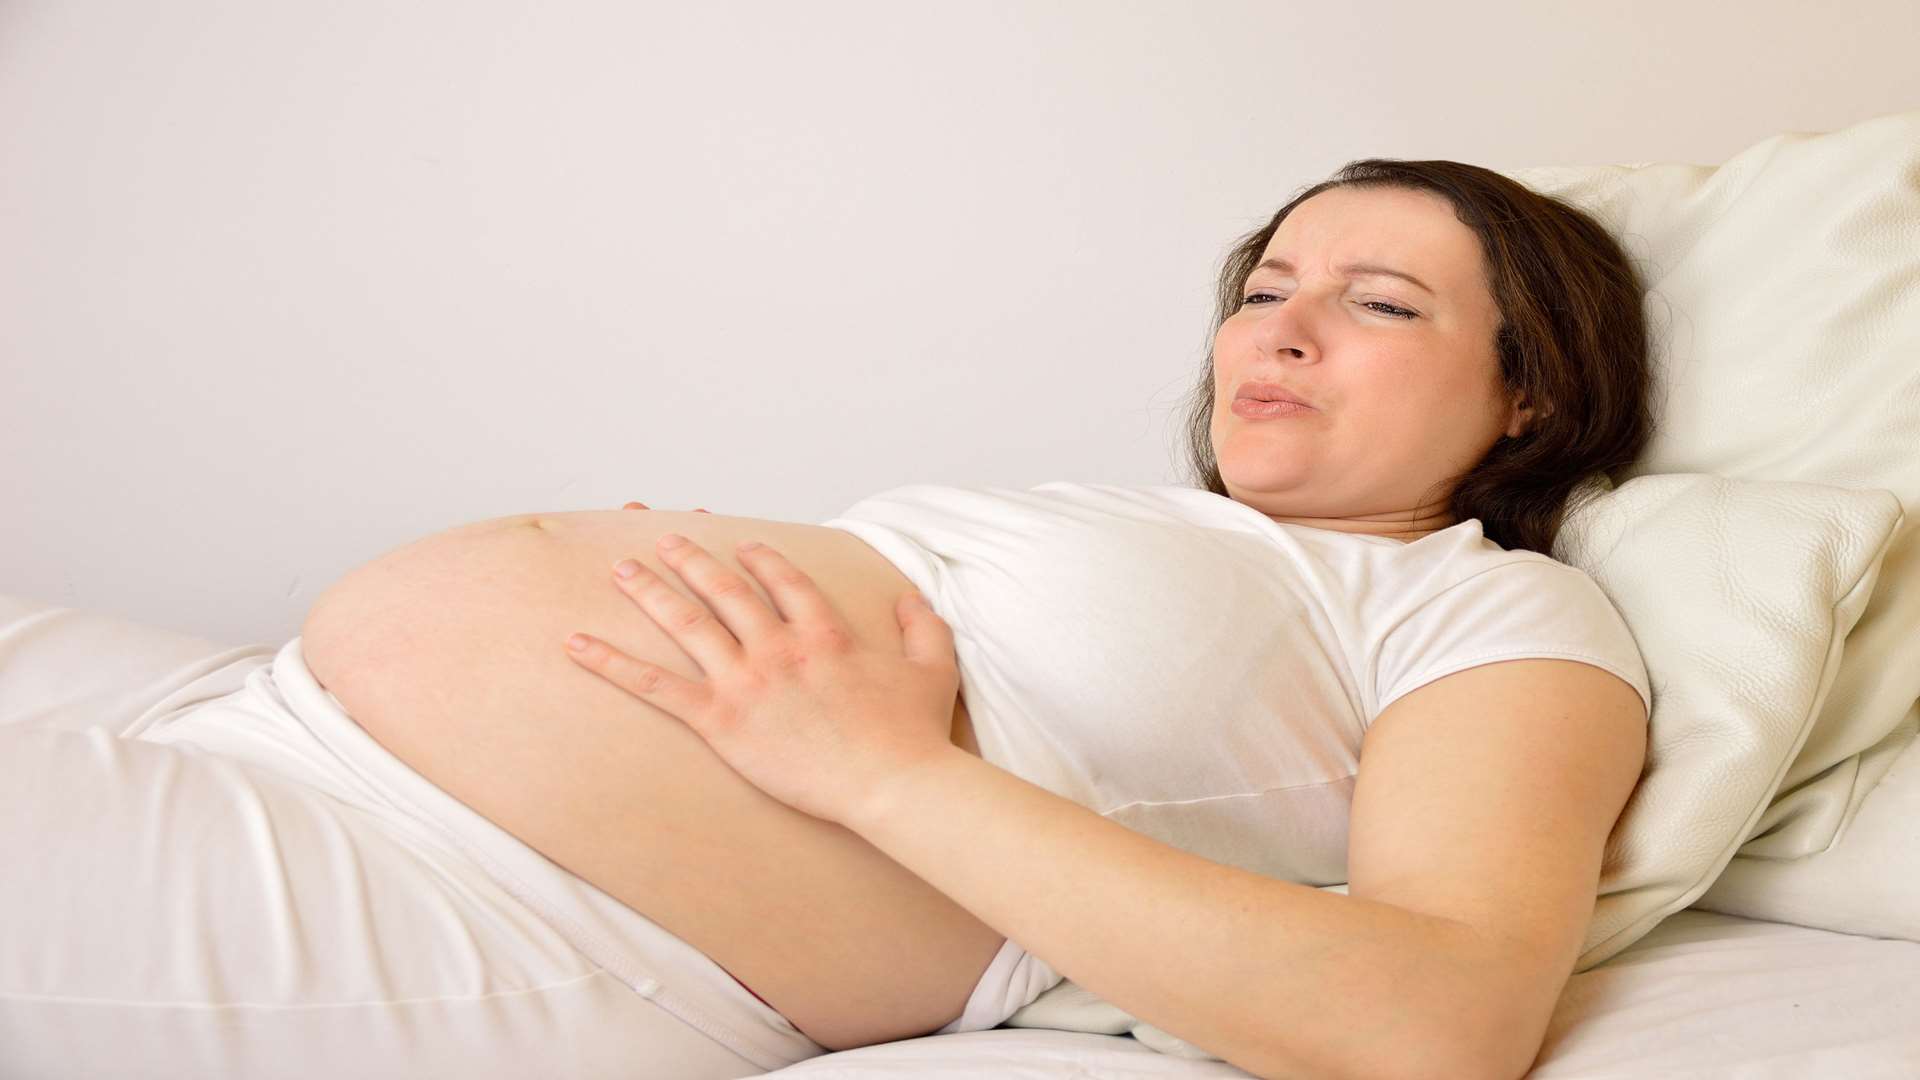 Some 29% of mums would prefer to give birth at home